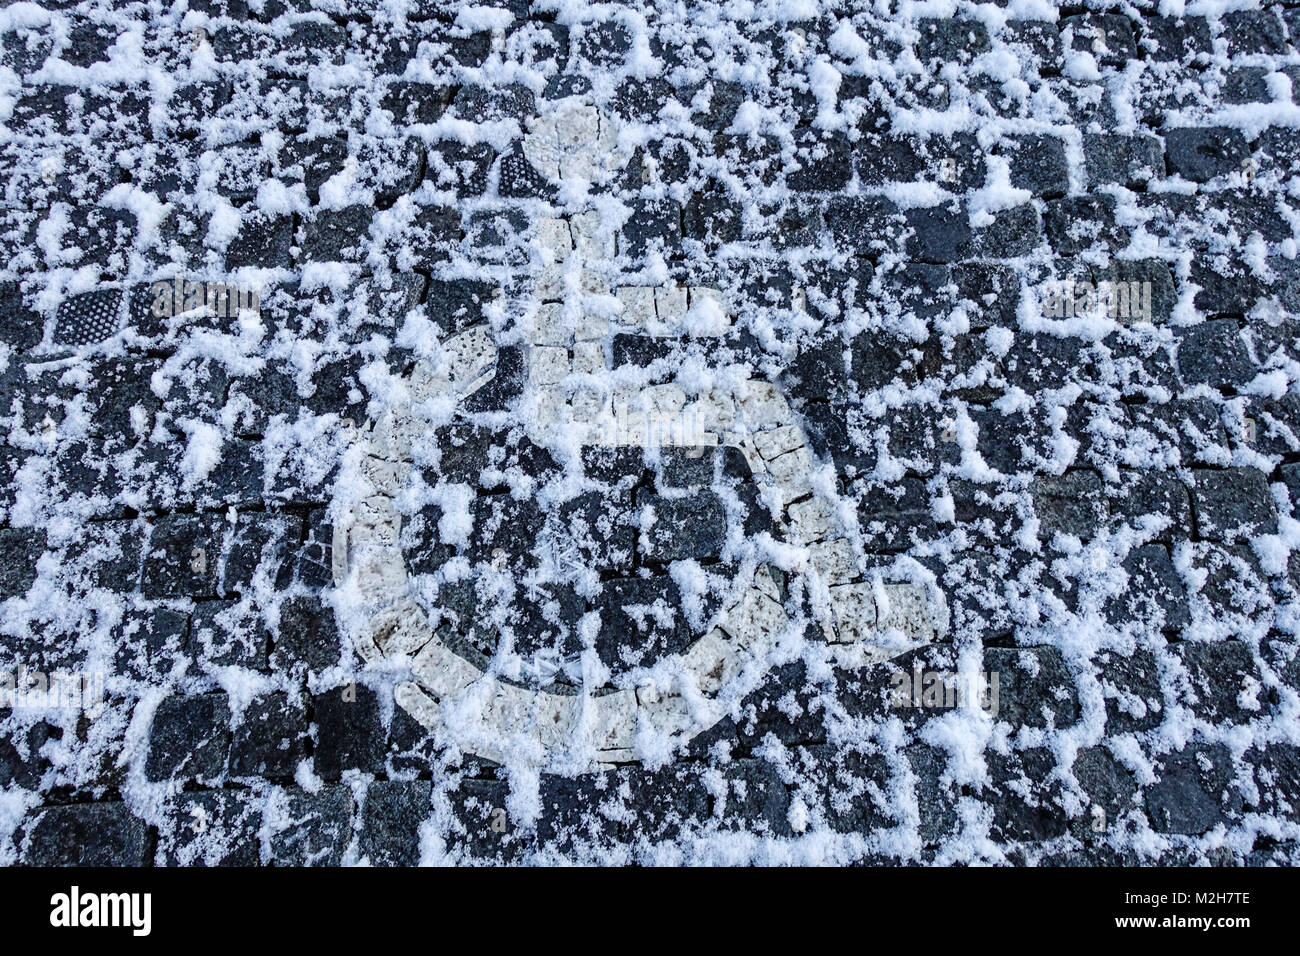 Disabled parking space symbol, snow Stock Photo